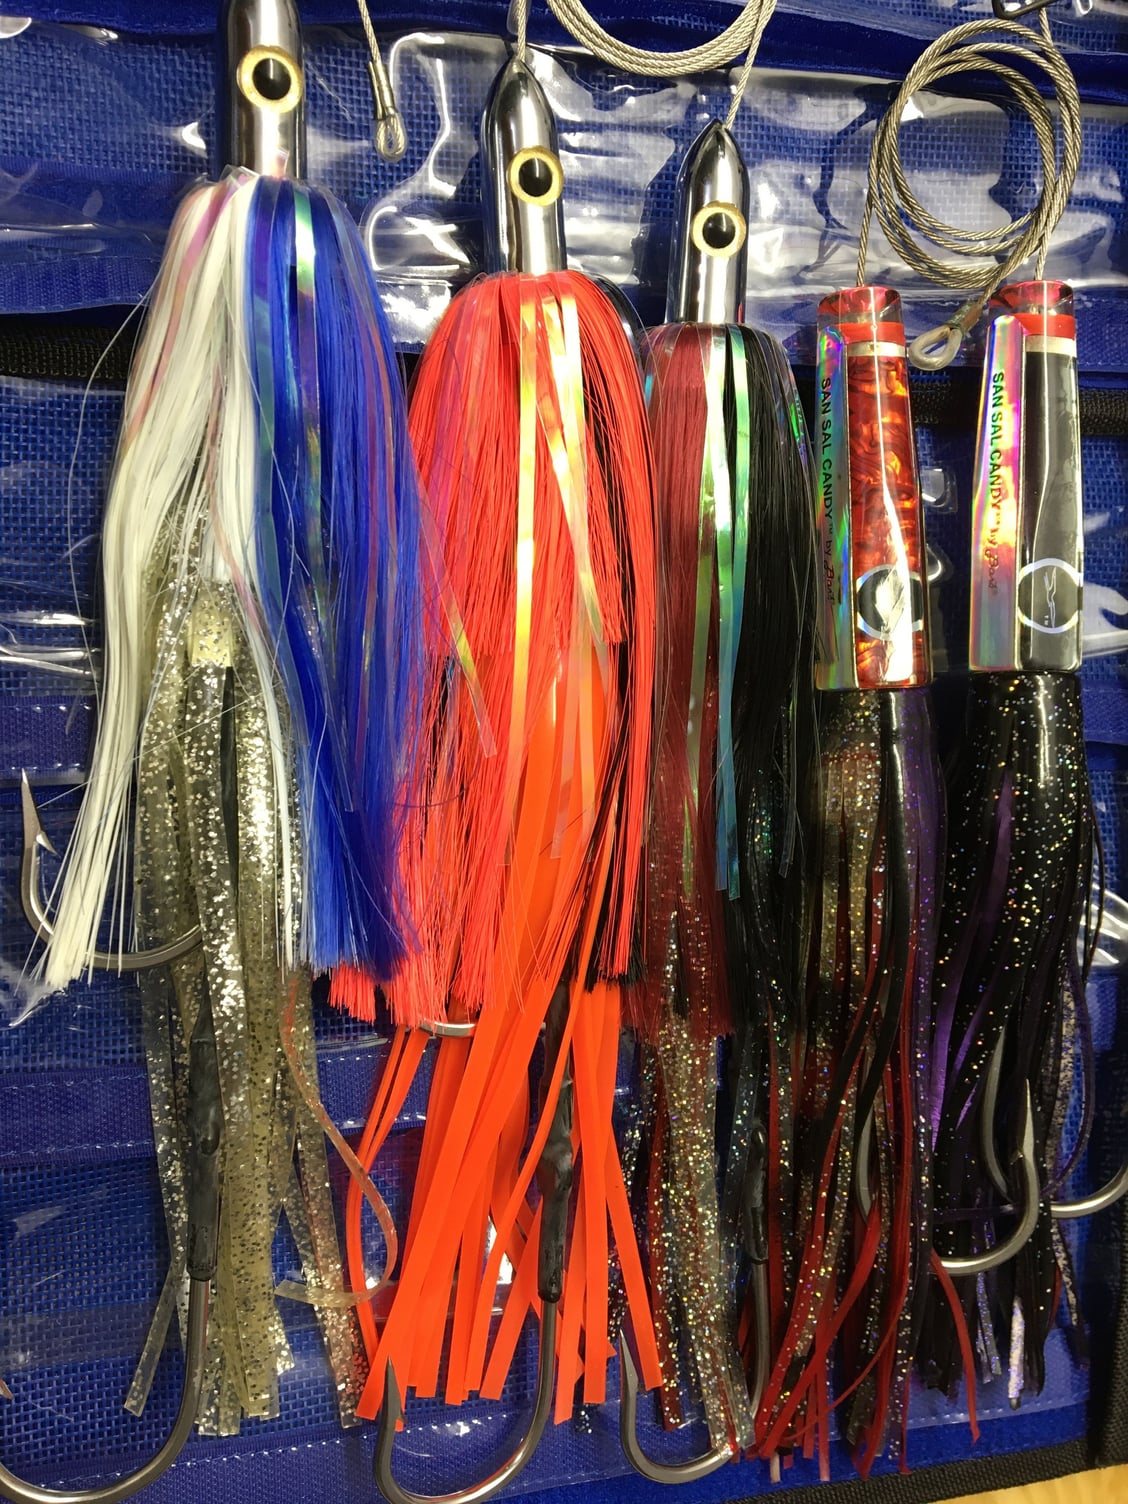 5 rigged wahoo lures - The Hull Truth - Boating and Fishing Forum